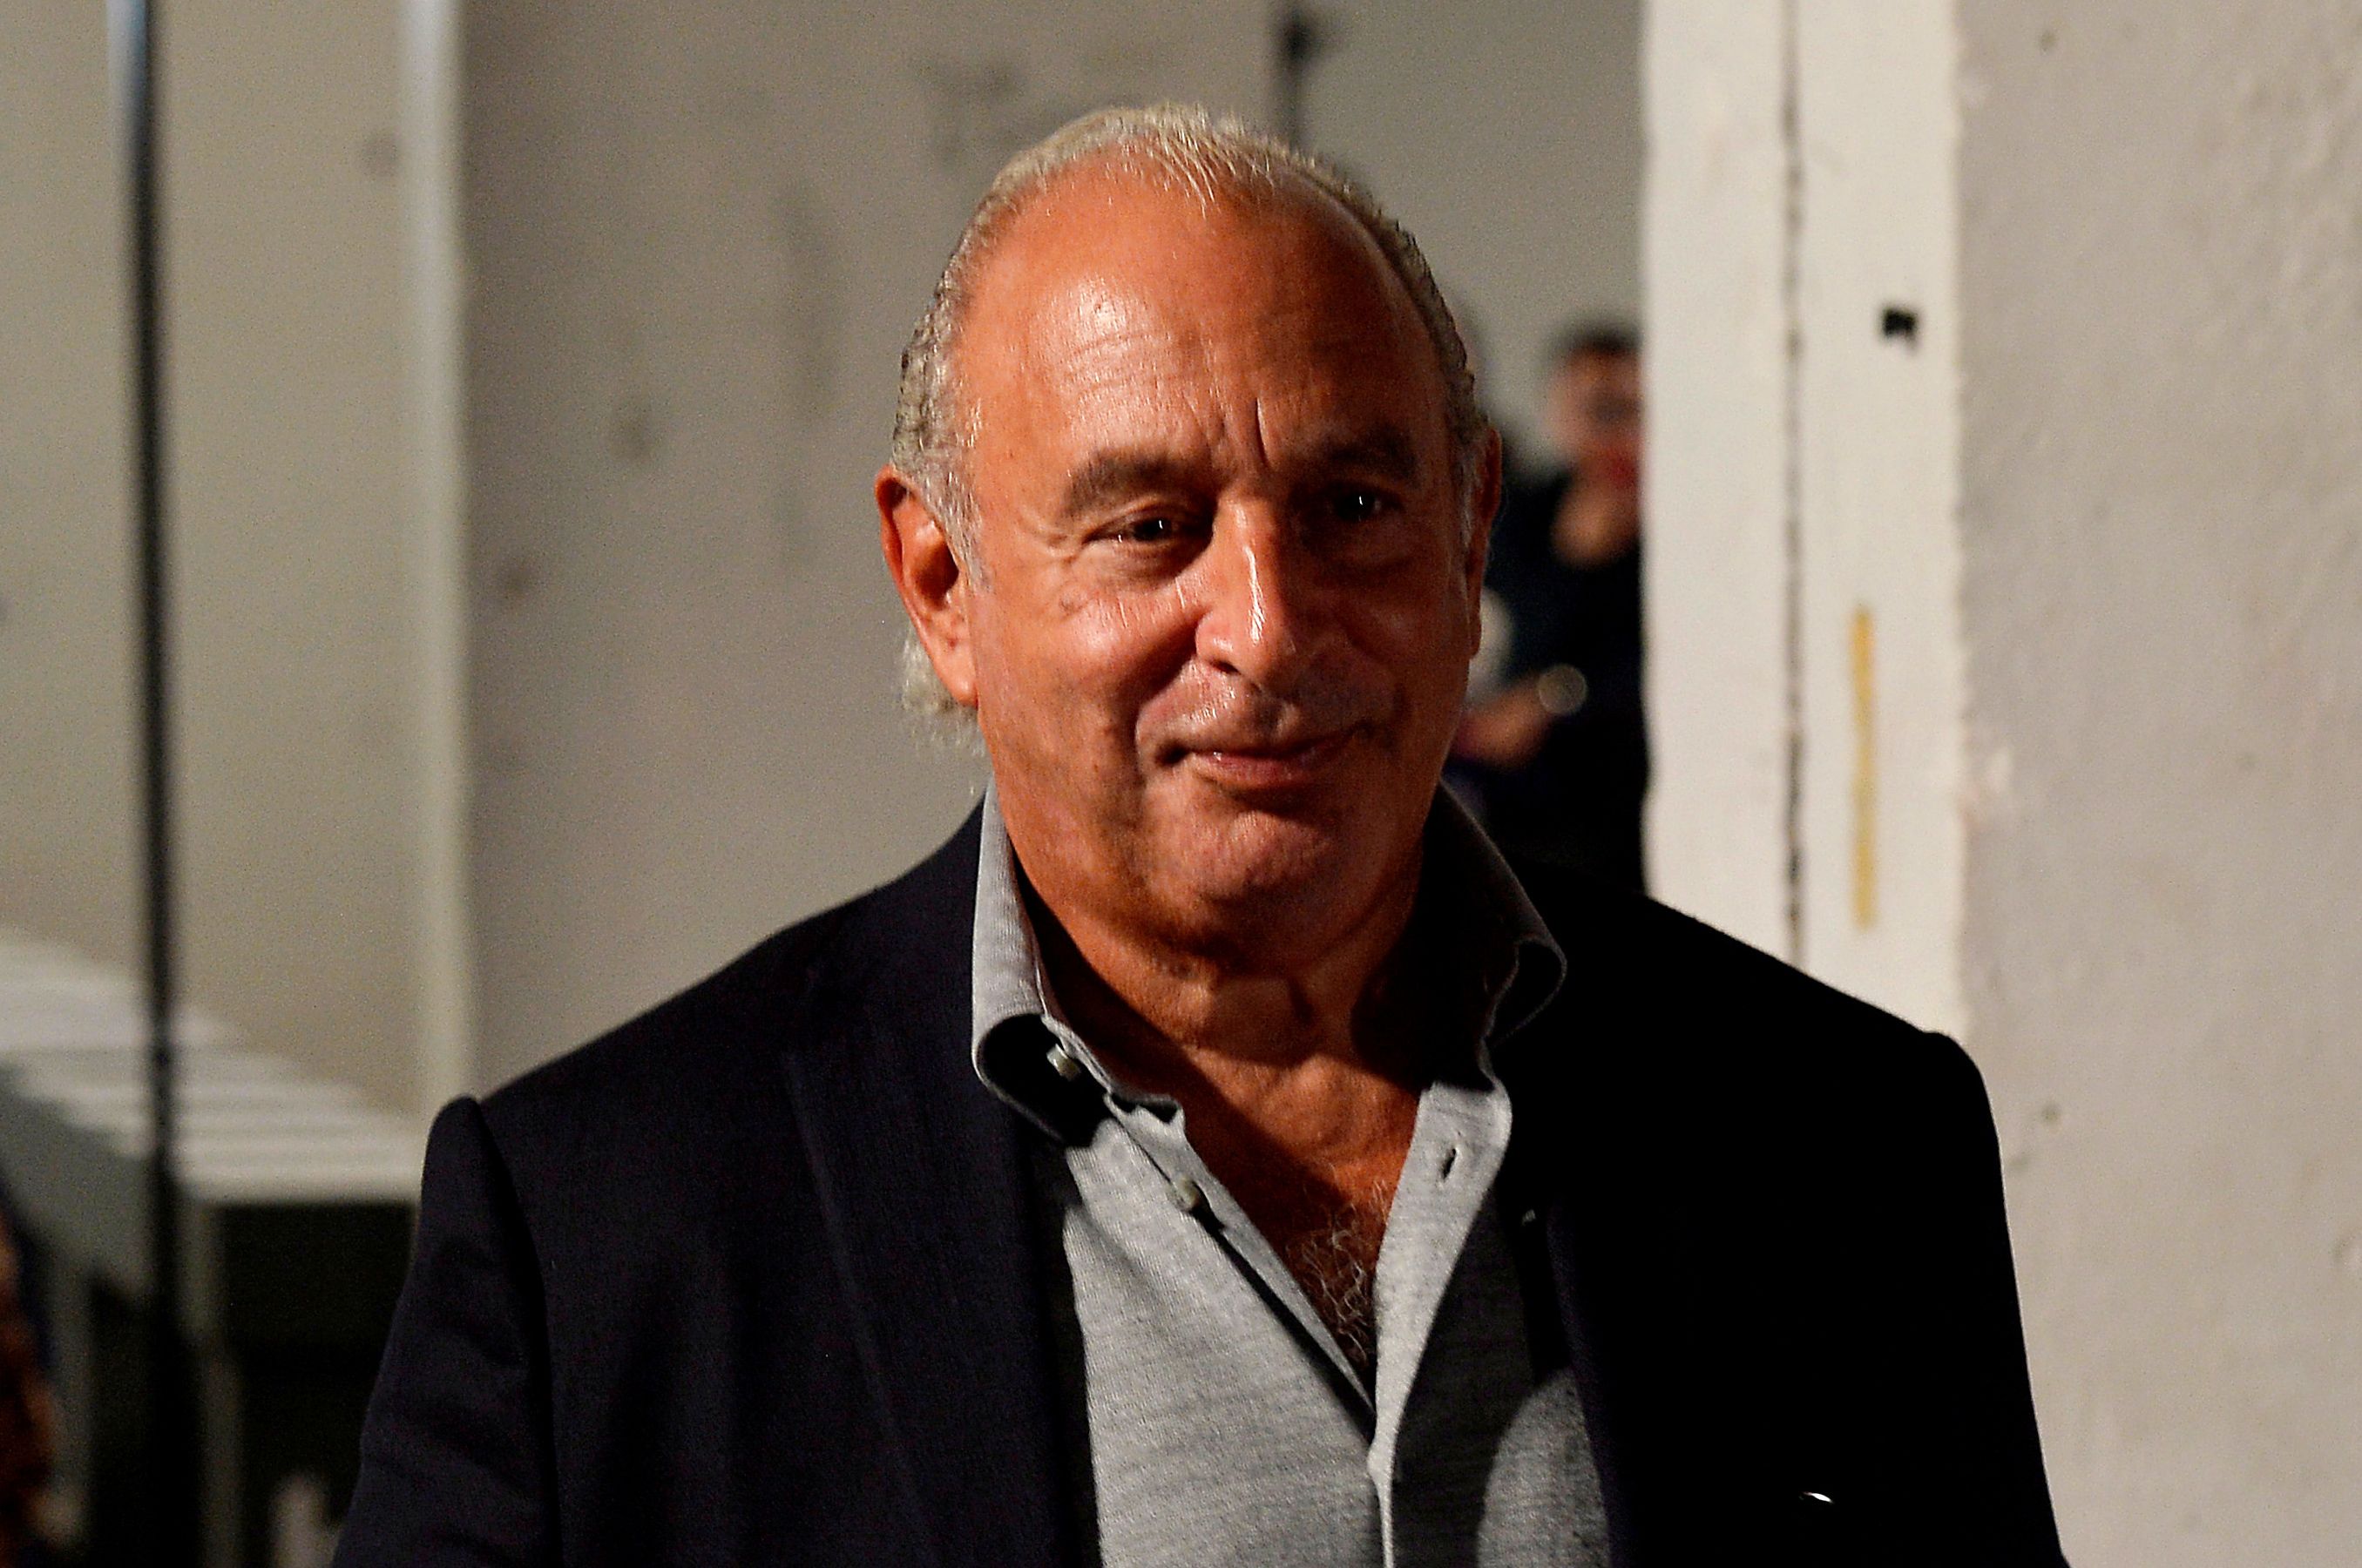 Retail tycoon Philip Green charged with assault after alleged touching